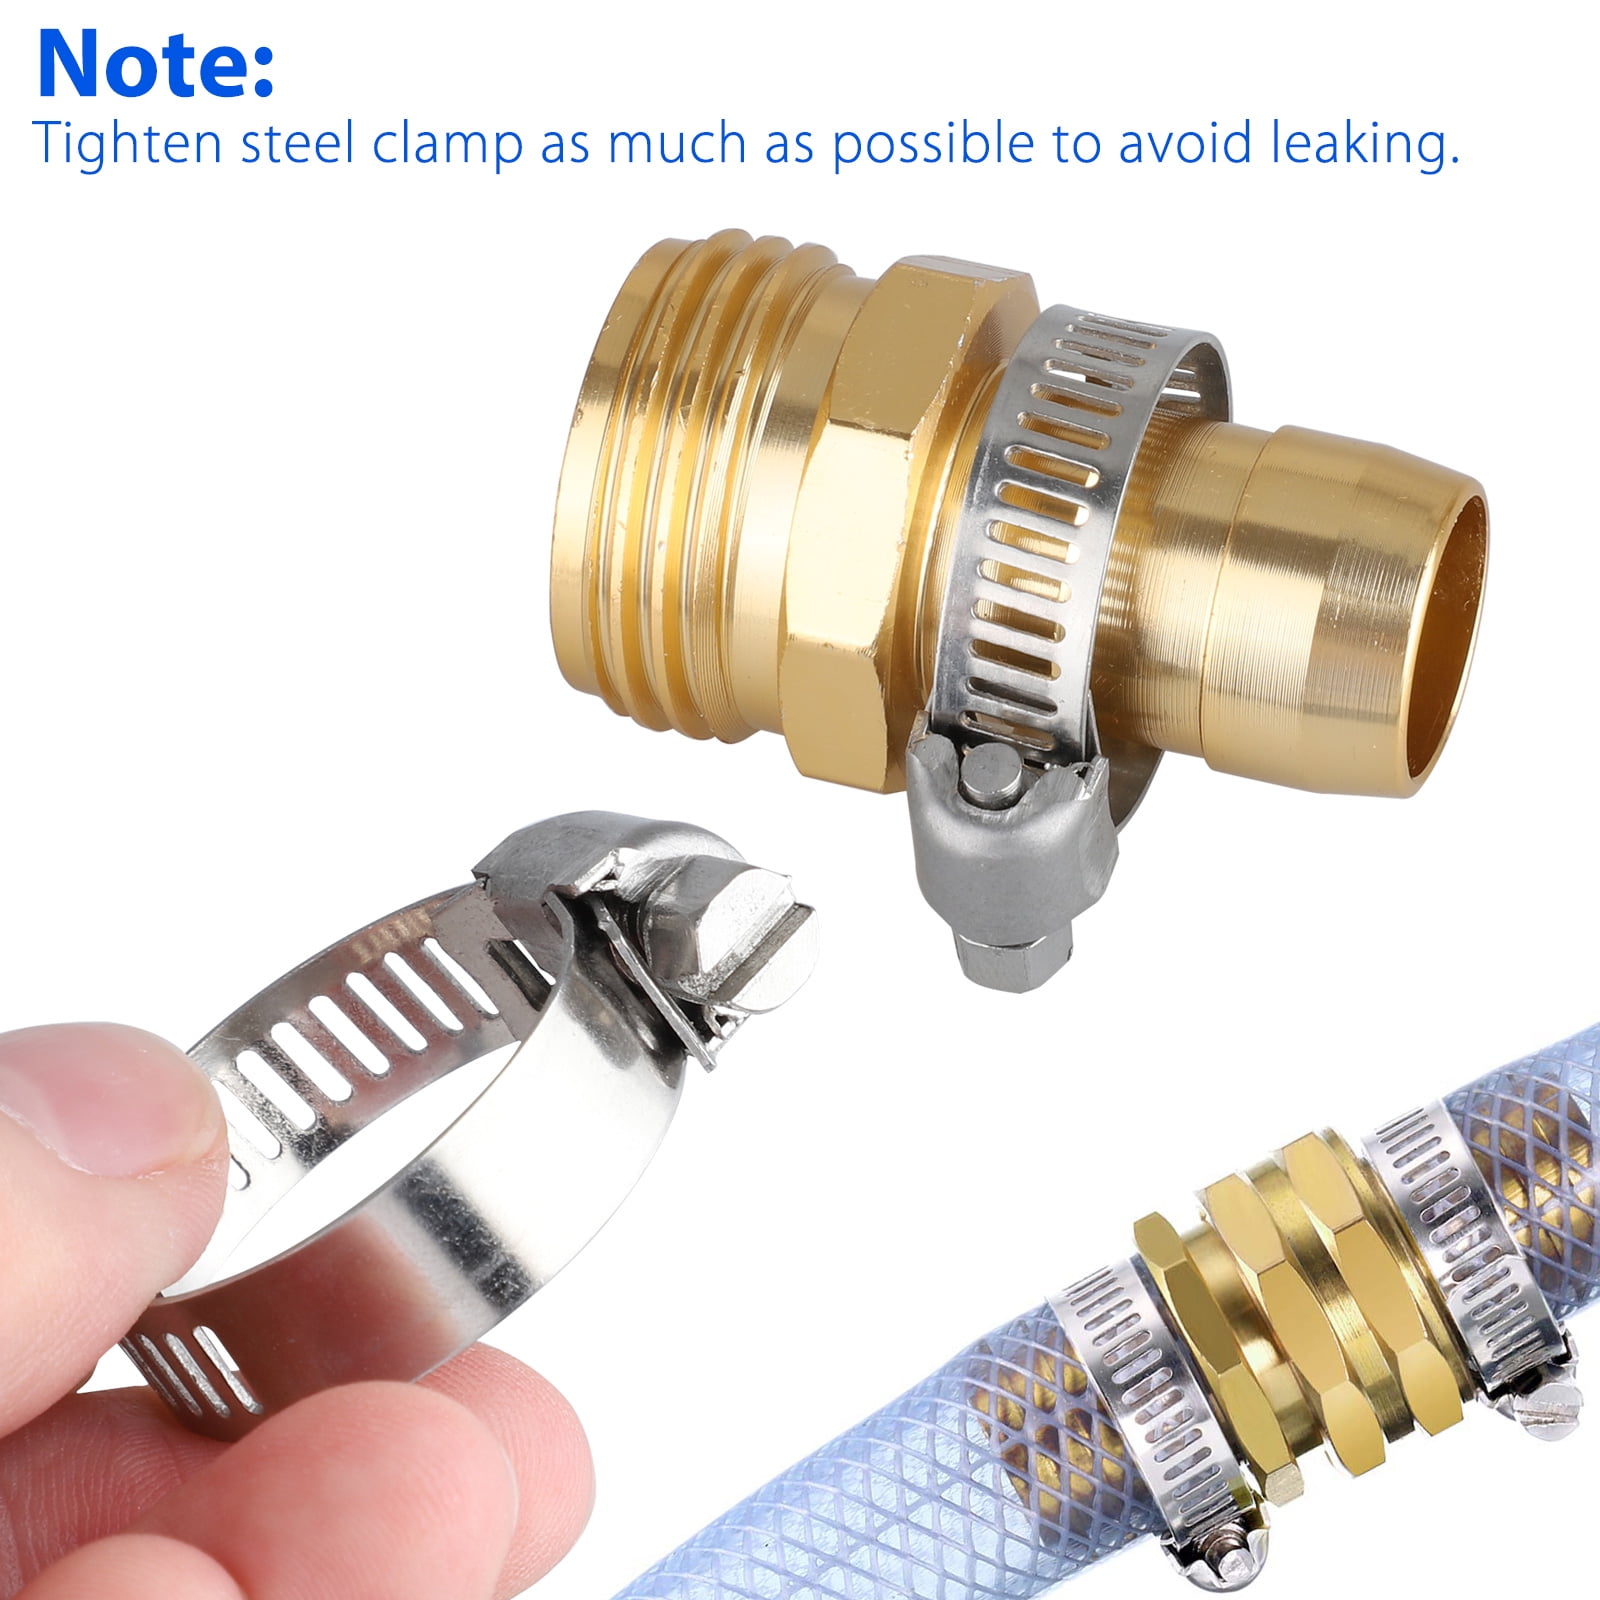 ZKZX 2Sets 5/8 Inch Aluminium Garden Hose Mender End Repair Kit,2Pcs 5/8 Barb Splicer Mender,Water Hose End Mender with Stainless Steel Clamp,Female and Male Hose Connector 2Sets with 2Splicers 